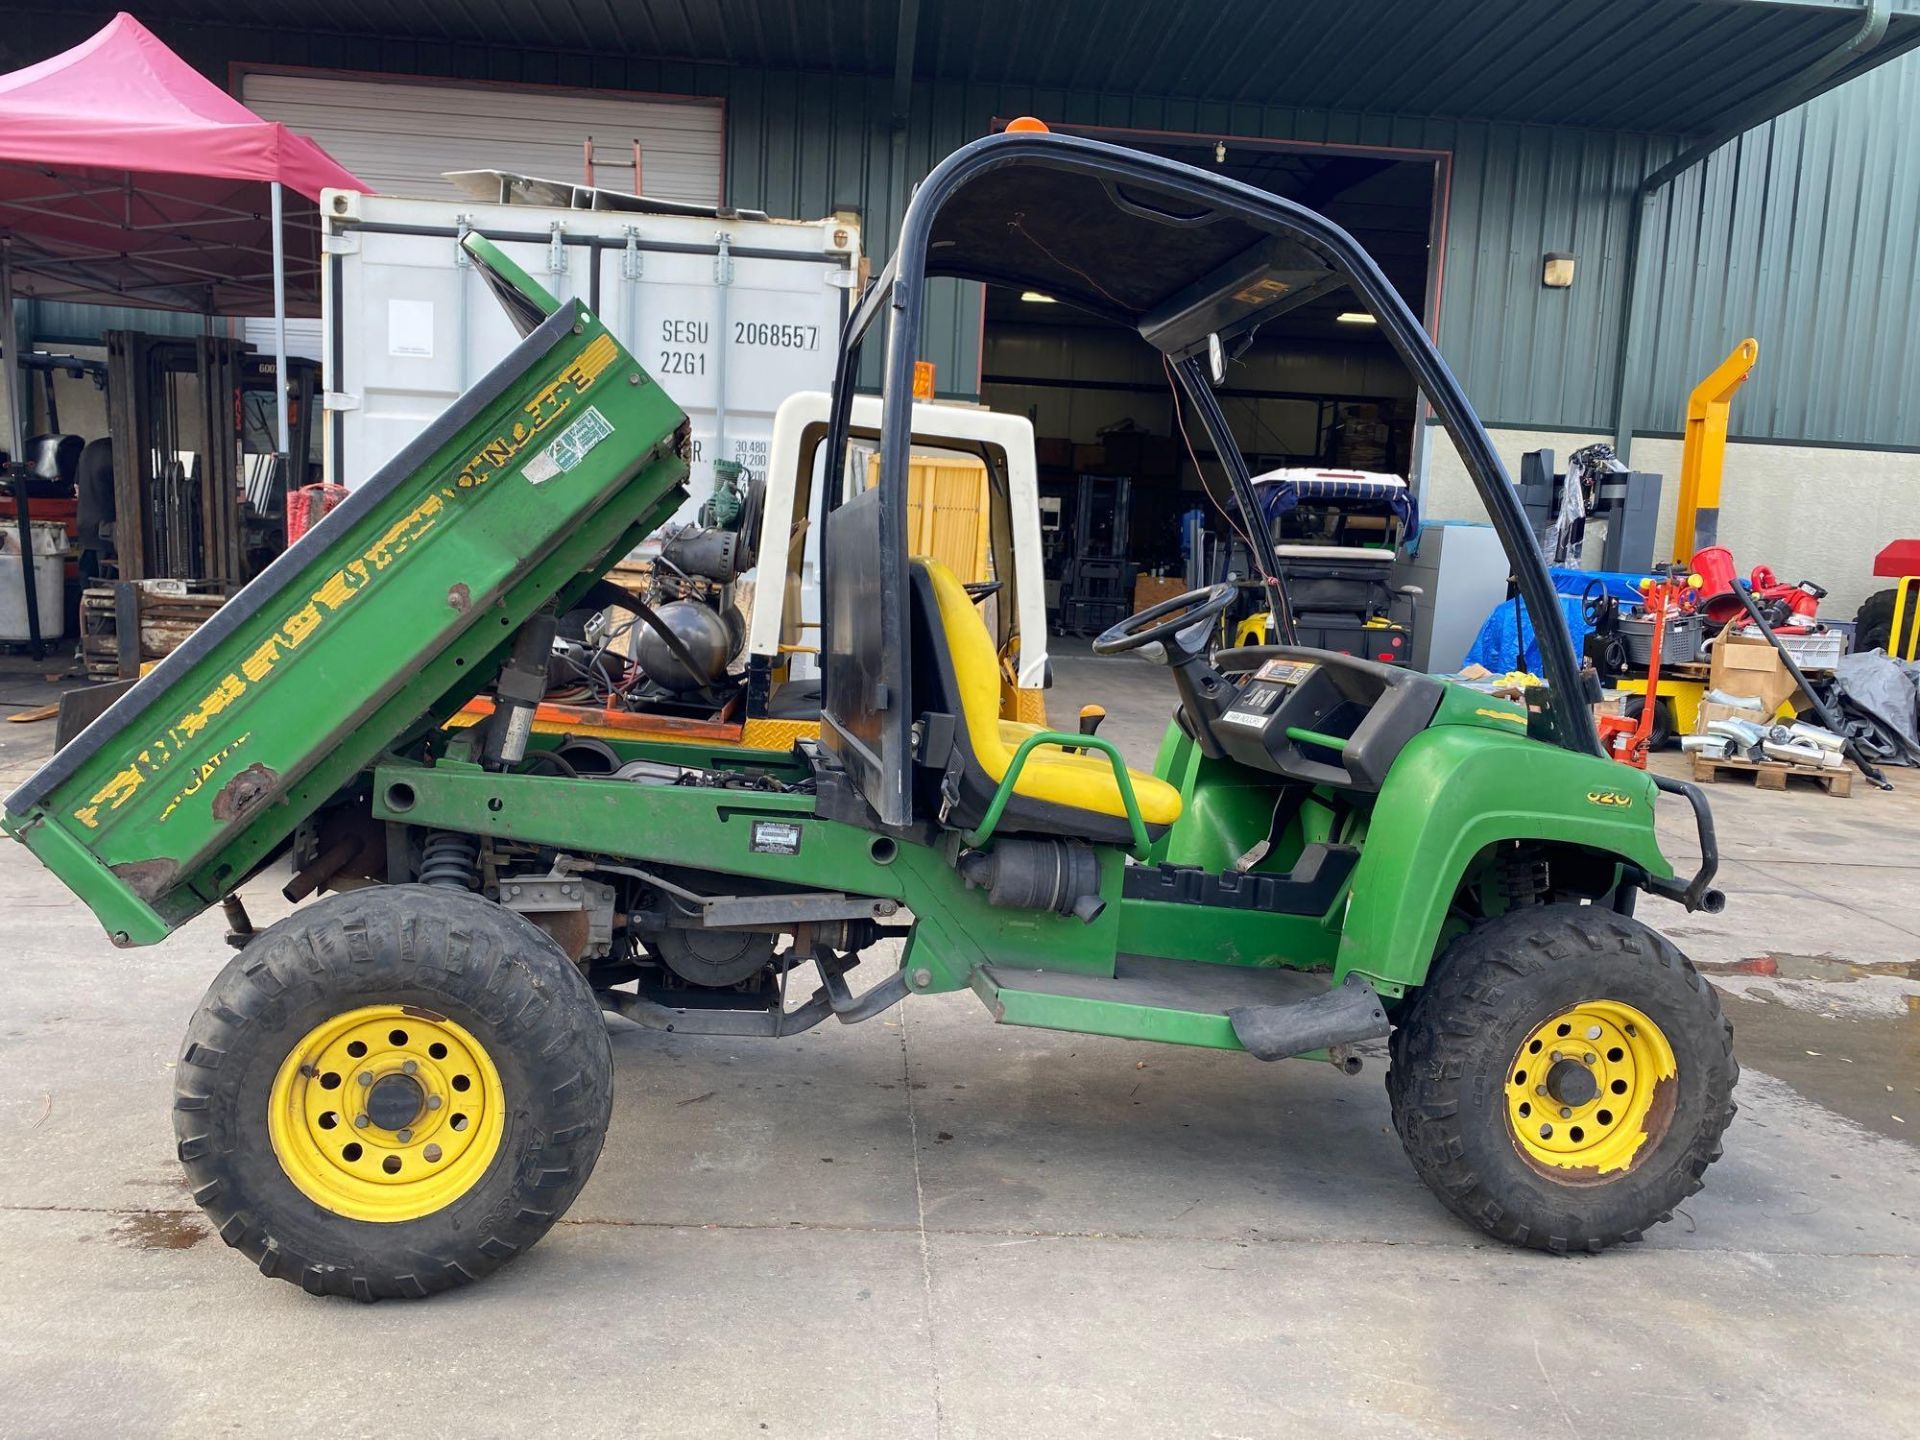 JOHN DEERE GATOR XUV UTILITY CART WITH HYDRAULIC DUMP BED, GAS POWERED, 1,713 HOURS SHOWING 4x4 - Image 6 of 9